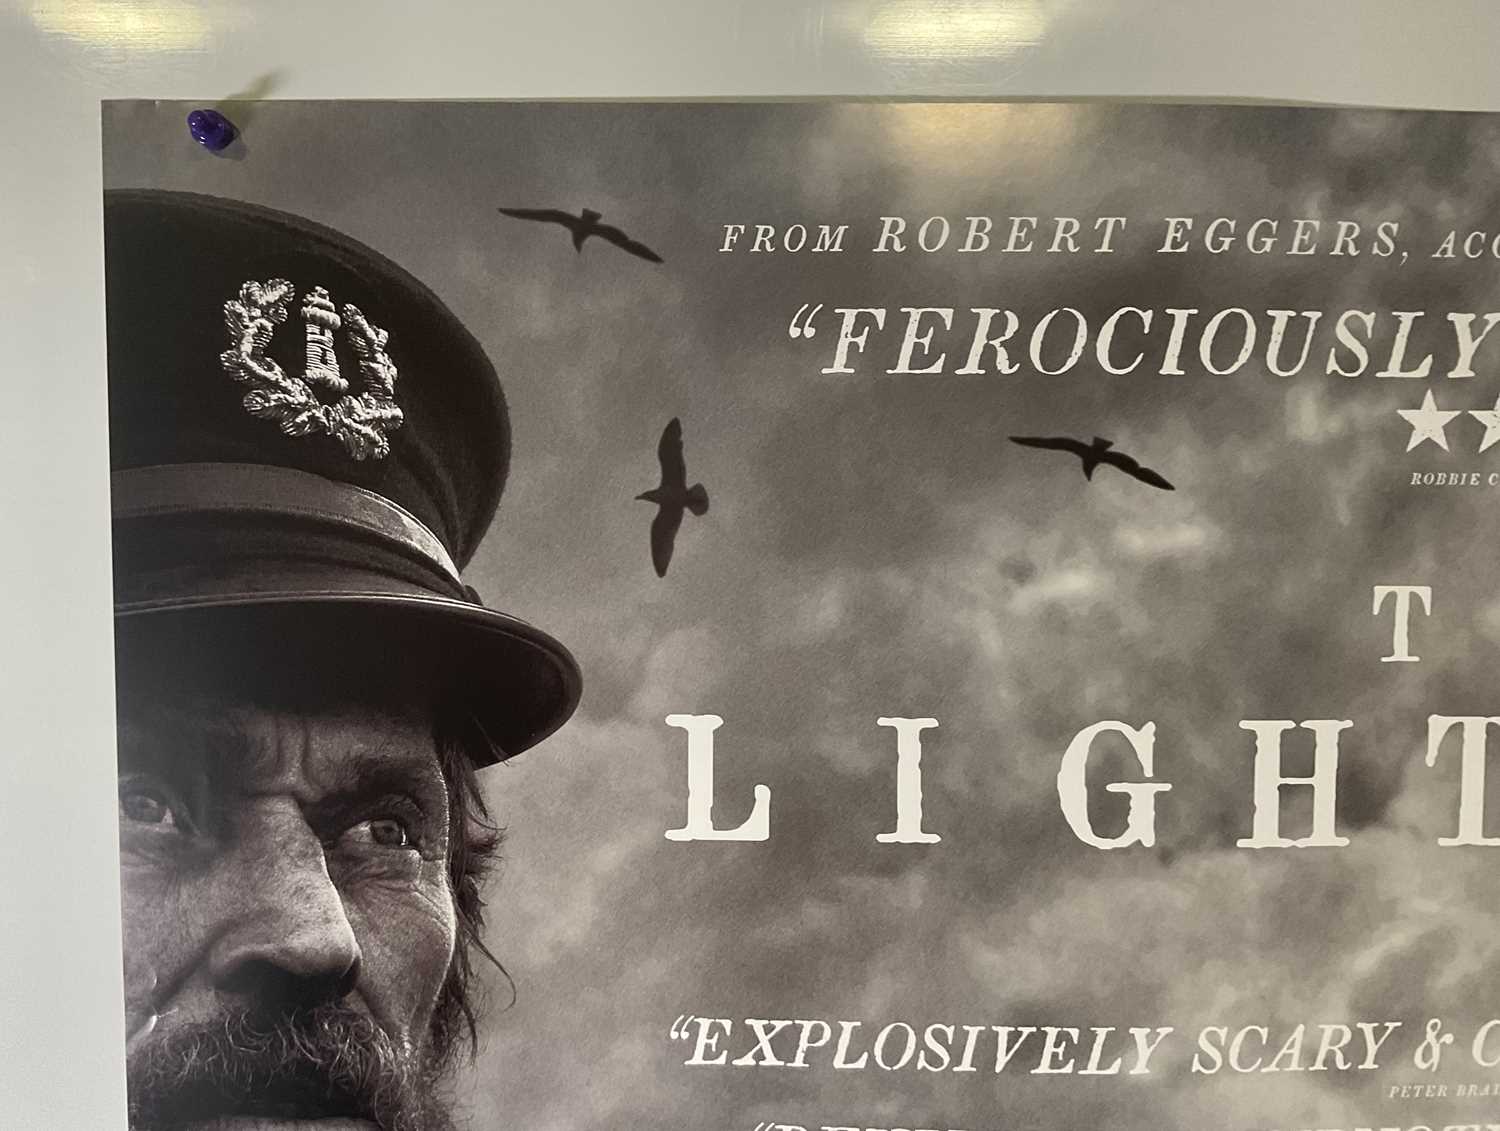 THE LIGHTHOUSE (2019) UK Quad film poster, nautical mystery thriller starring Willem Defoe and - Image 2 of 6